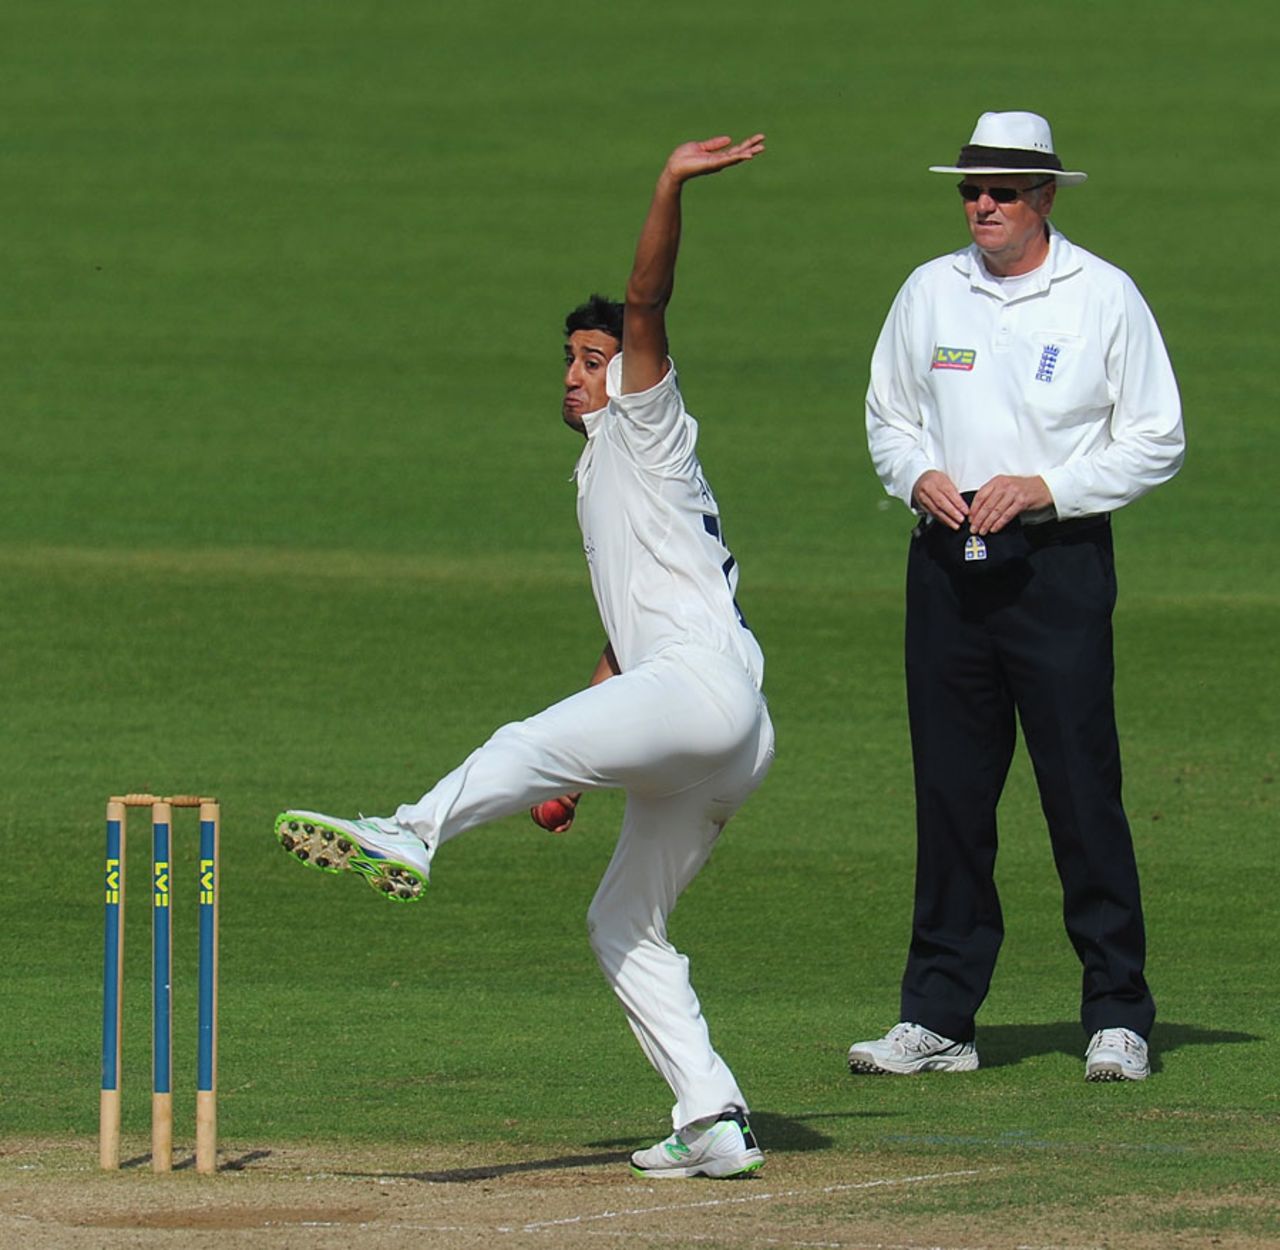 Usman Arshad in his delivery stride, Durham v Sussex, County Championship, Division One, Chester-le-Street, September 4, 2013